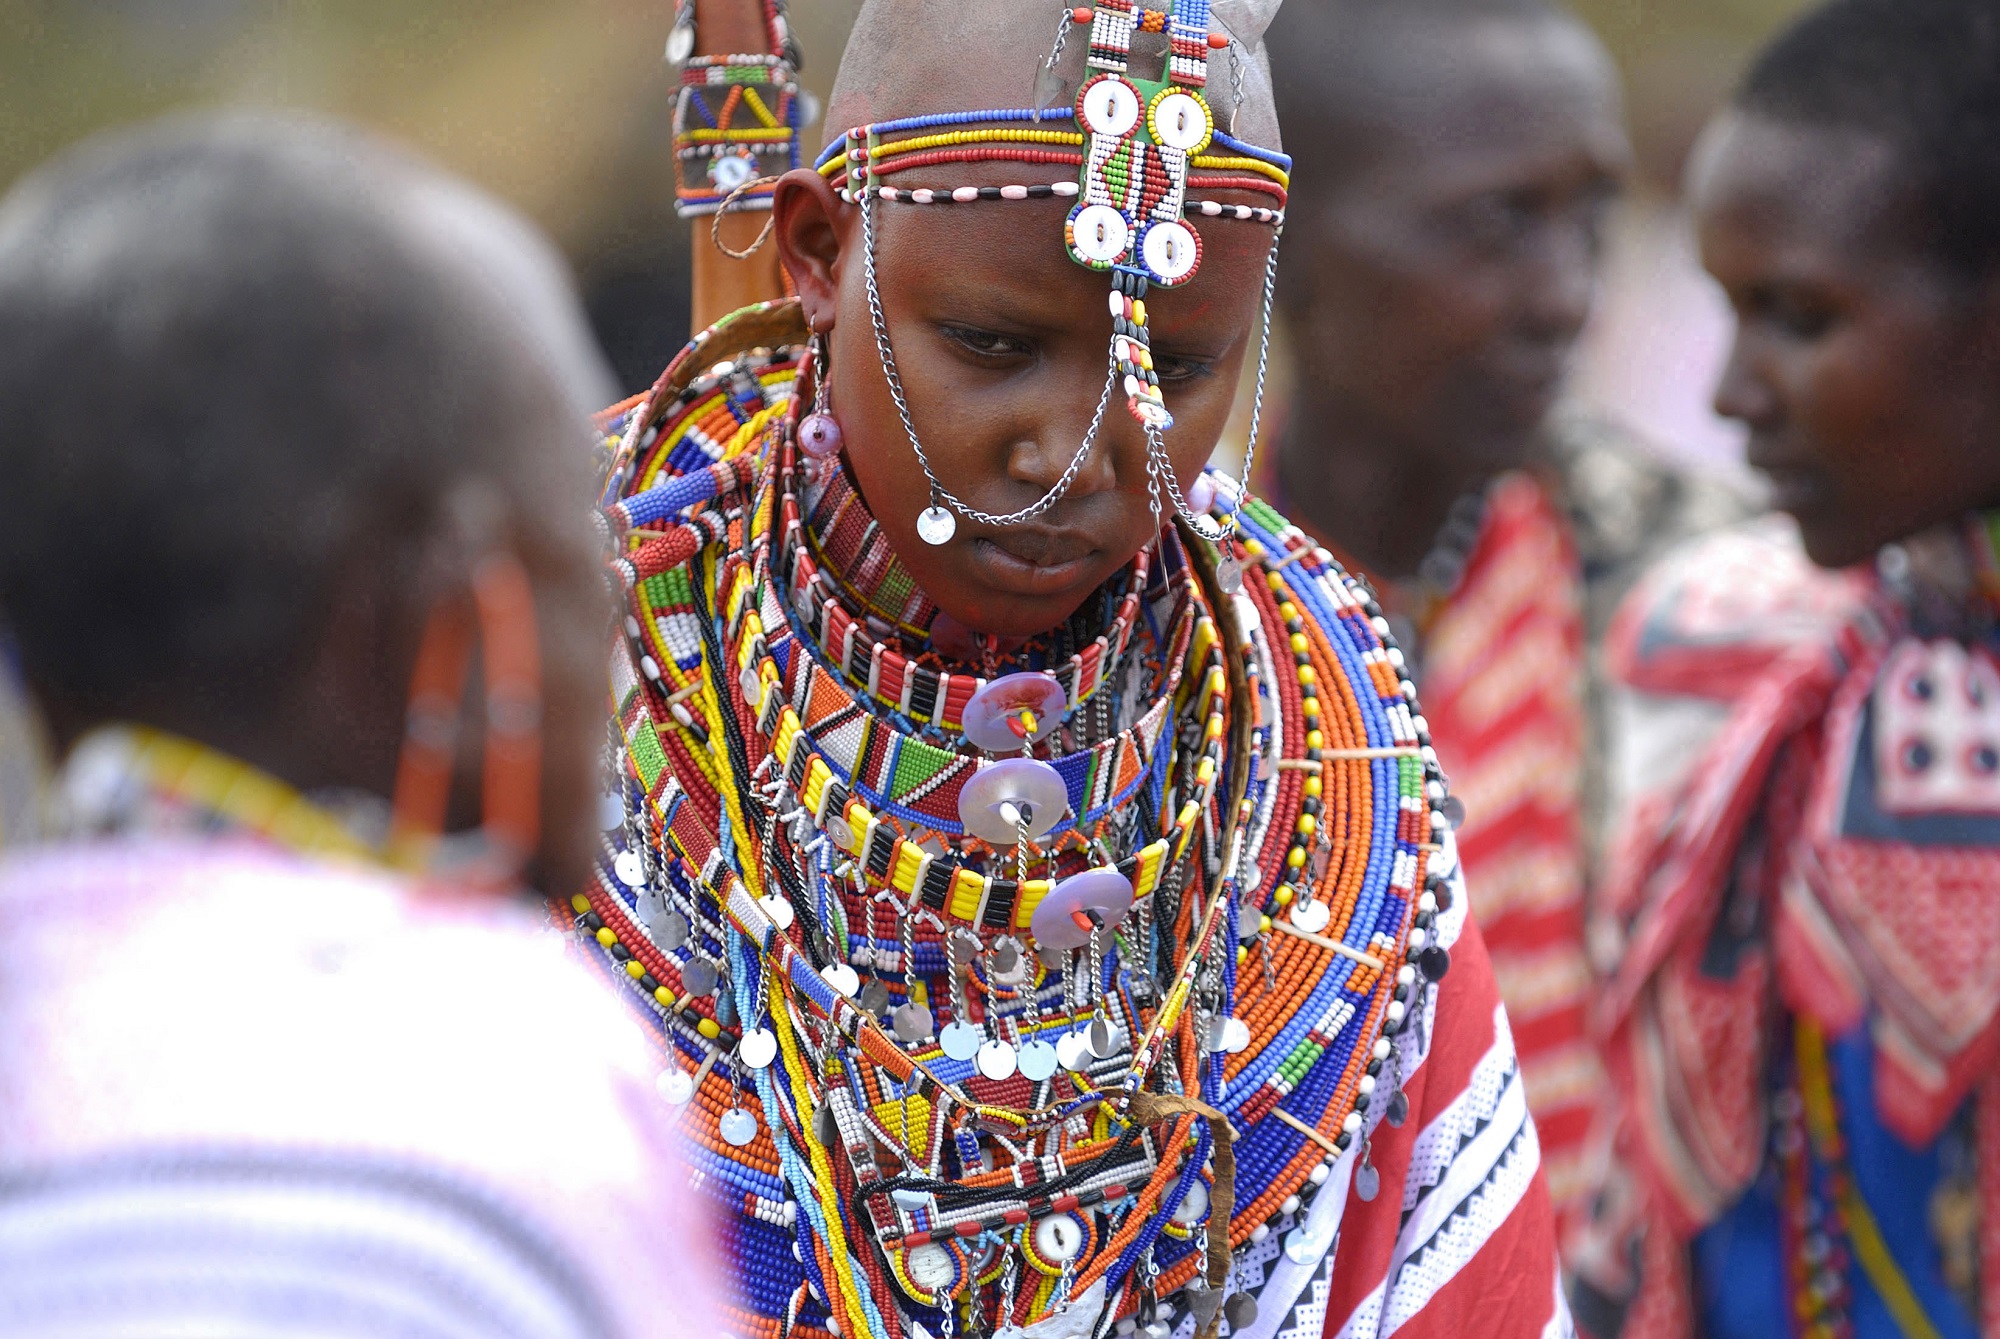 Maasai bride Namunyak Baiera wears traditional bead necklaces during her wedding in Olepolos village, 120 km (74 miles) southeast Nairobi, March 31, 2007. In the Maasai tradition the groom has to pay for his bride in cows and sheep, which have to be brought to her family on the wedding day. REUTERS/Damien Guerchois (KENYA) - RTR1ODTF